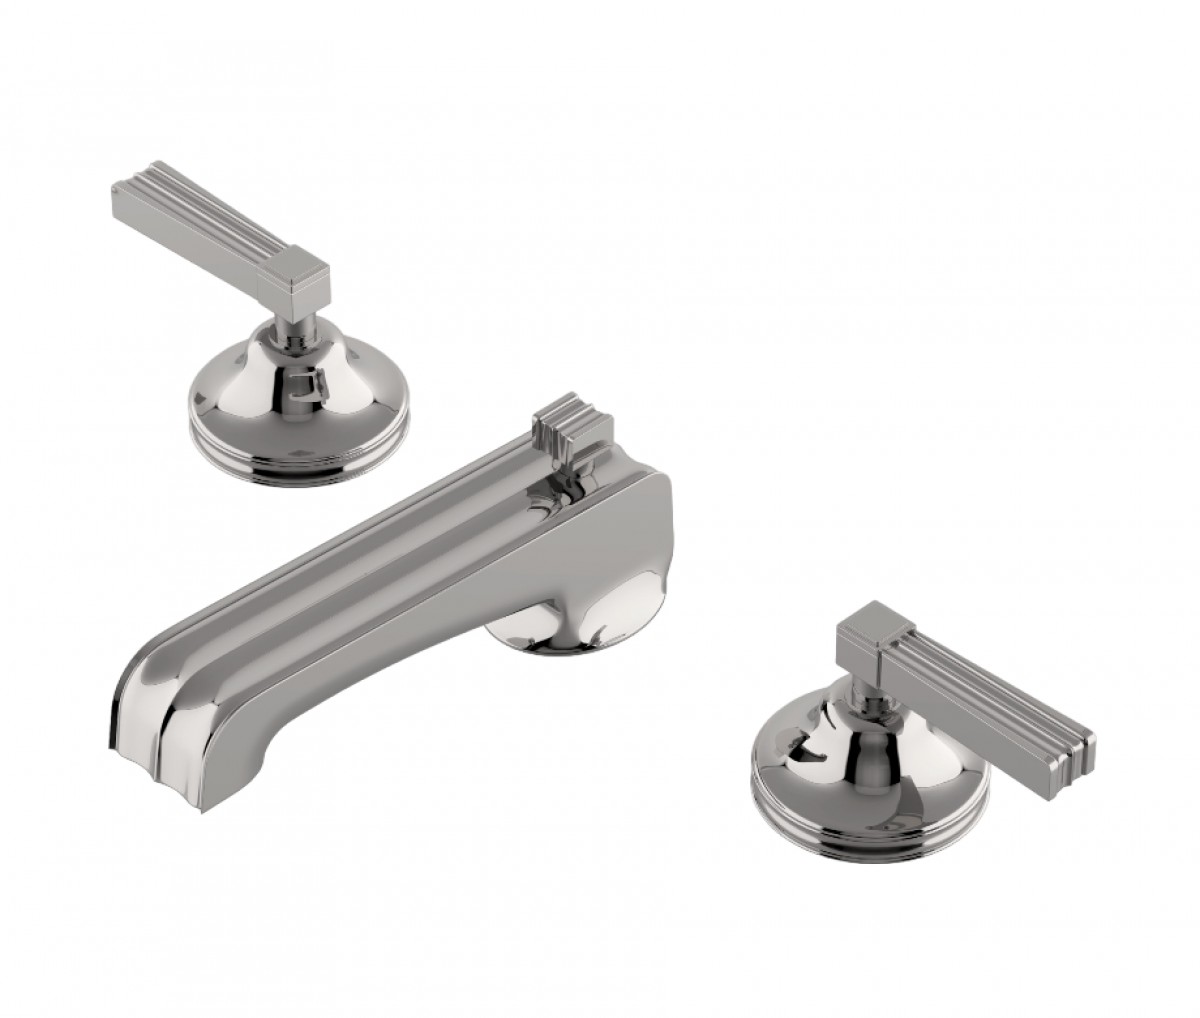 Boulevard Low Profile Three Hole Deck Mounted Lavatory Faucet with Metal Lever Handles